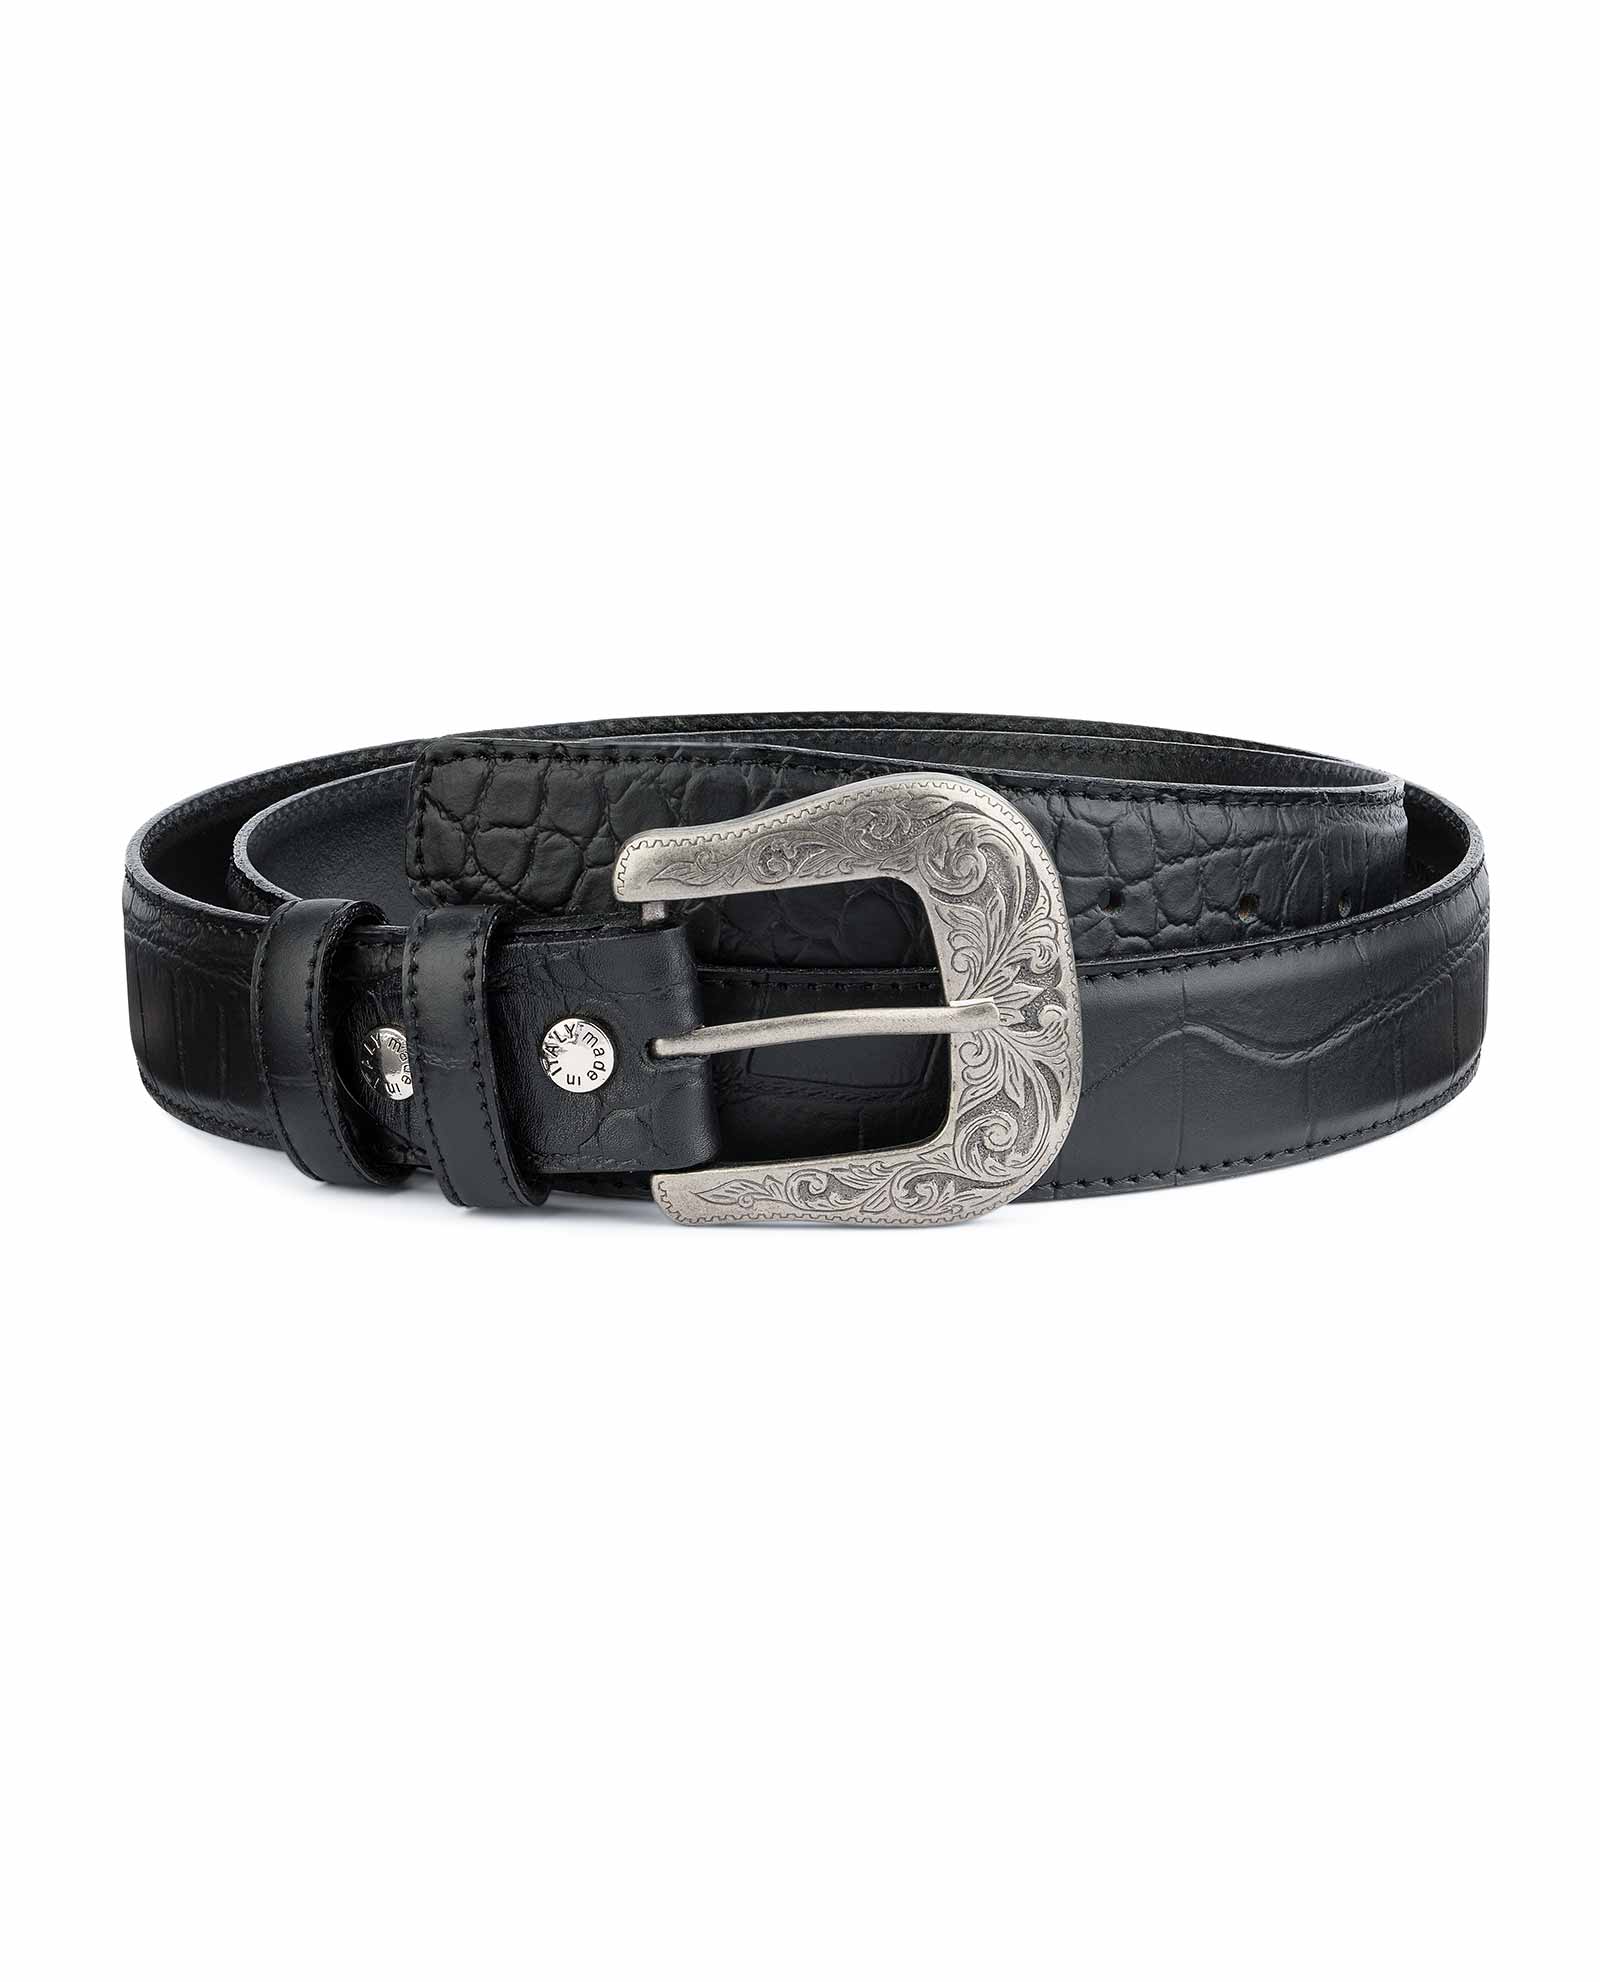 Mens 1.38 Wide Silver Crocodile Embossed Leather Belt with Stylish Buckle 